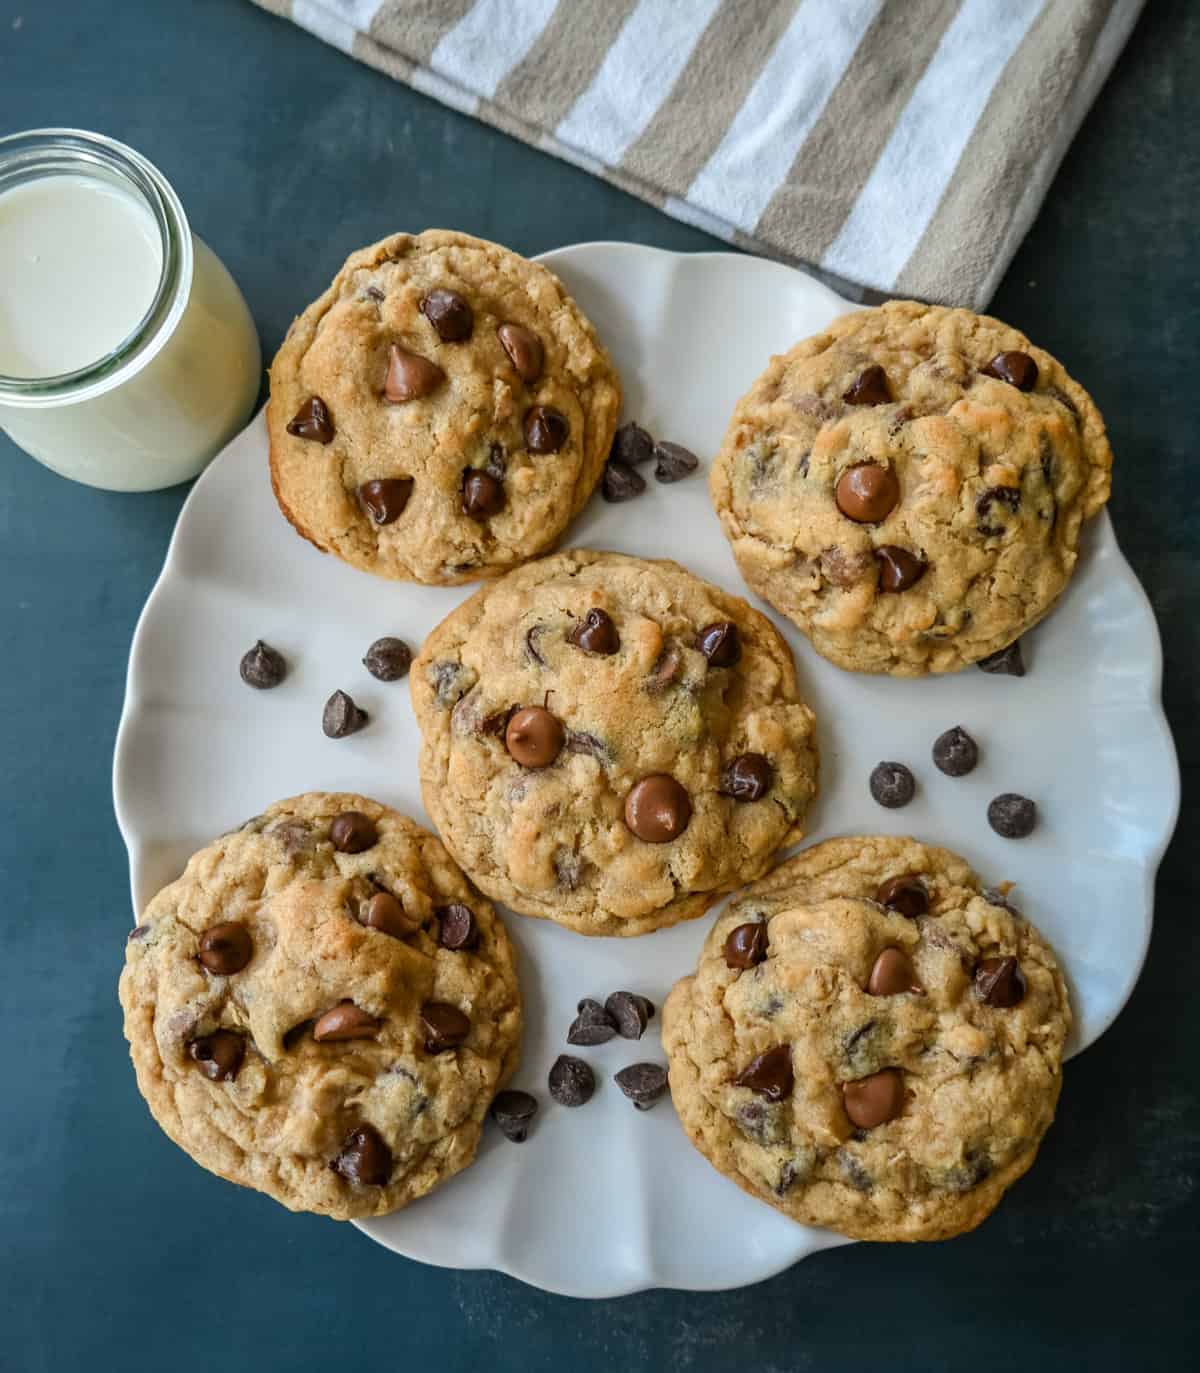 Bakery Style Oatmeal Chocolate Chip Cookies. These chewy oatmeal chocolate chip cookies are perfectly soft and chewy and filled with the perfect amount of oats and chocolate for the best chocolate chip oatmeal cookie.